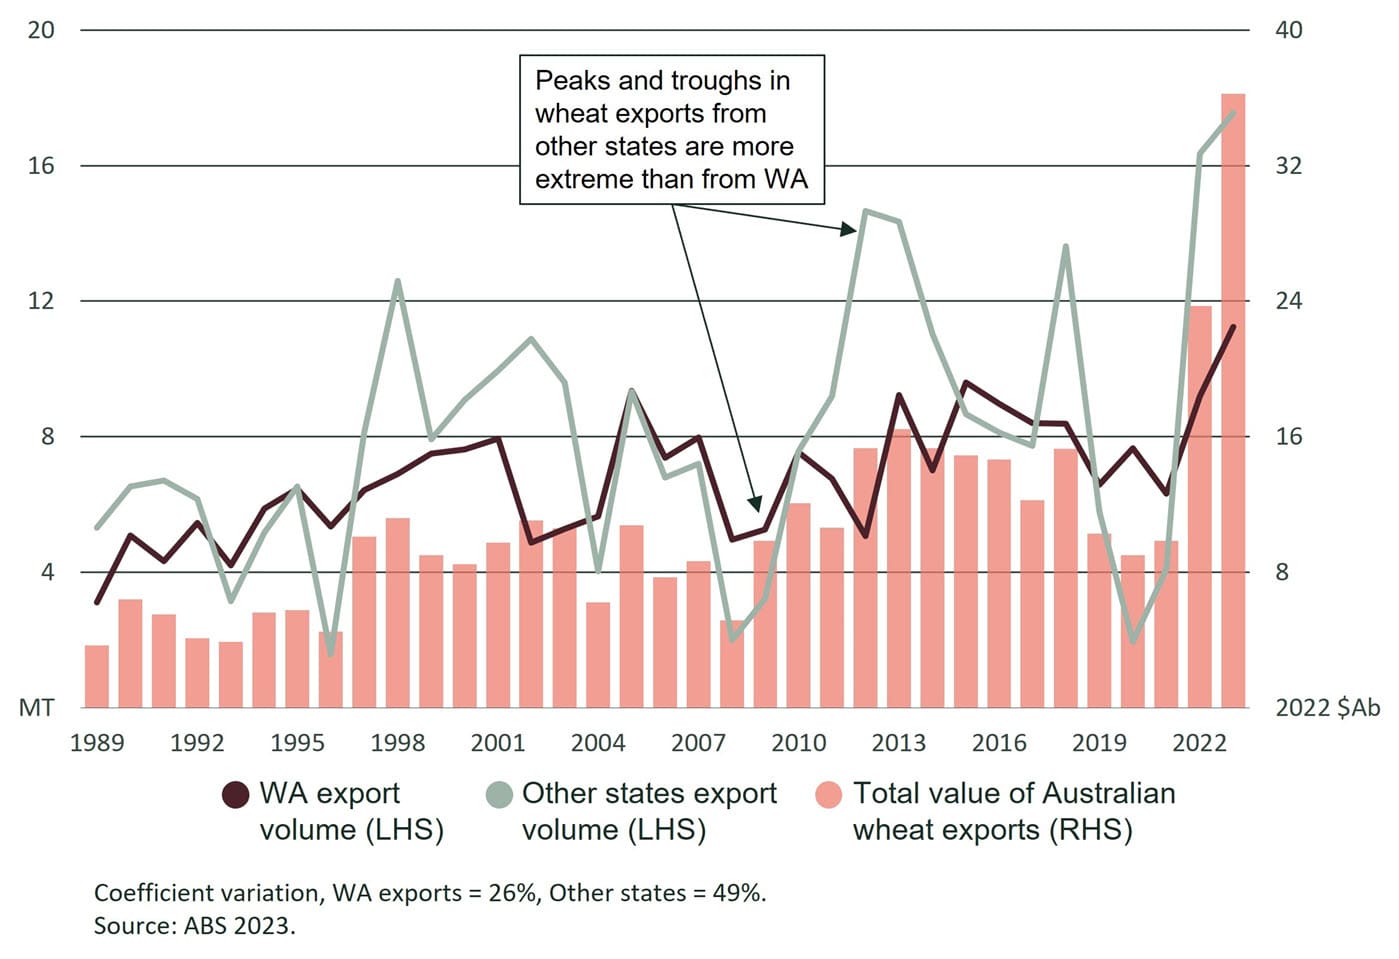 WA and other states wheat exports (million metric tonnes) and total value of Australian wheat exports (2022 A$).